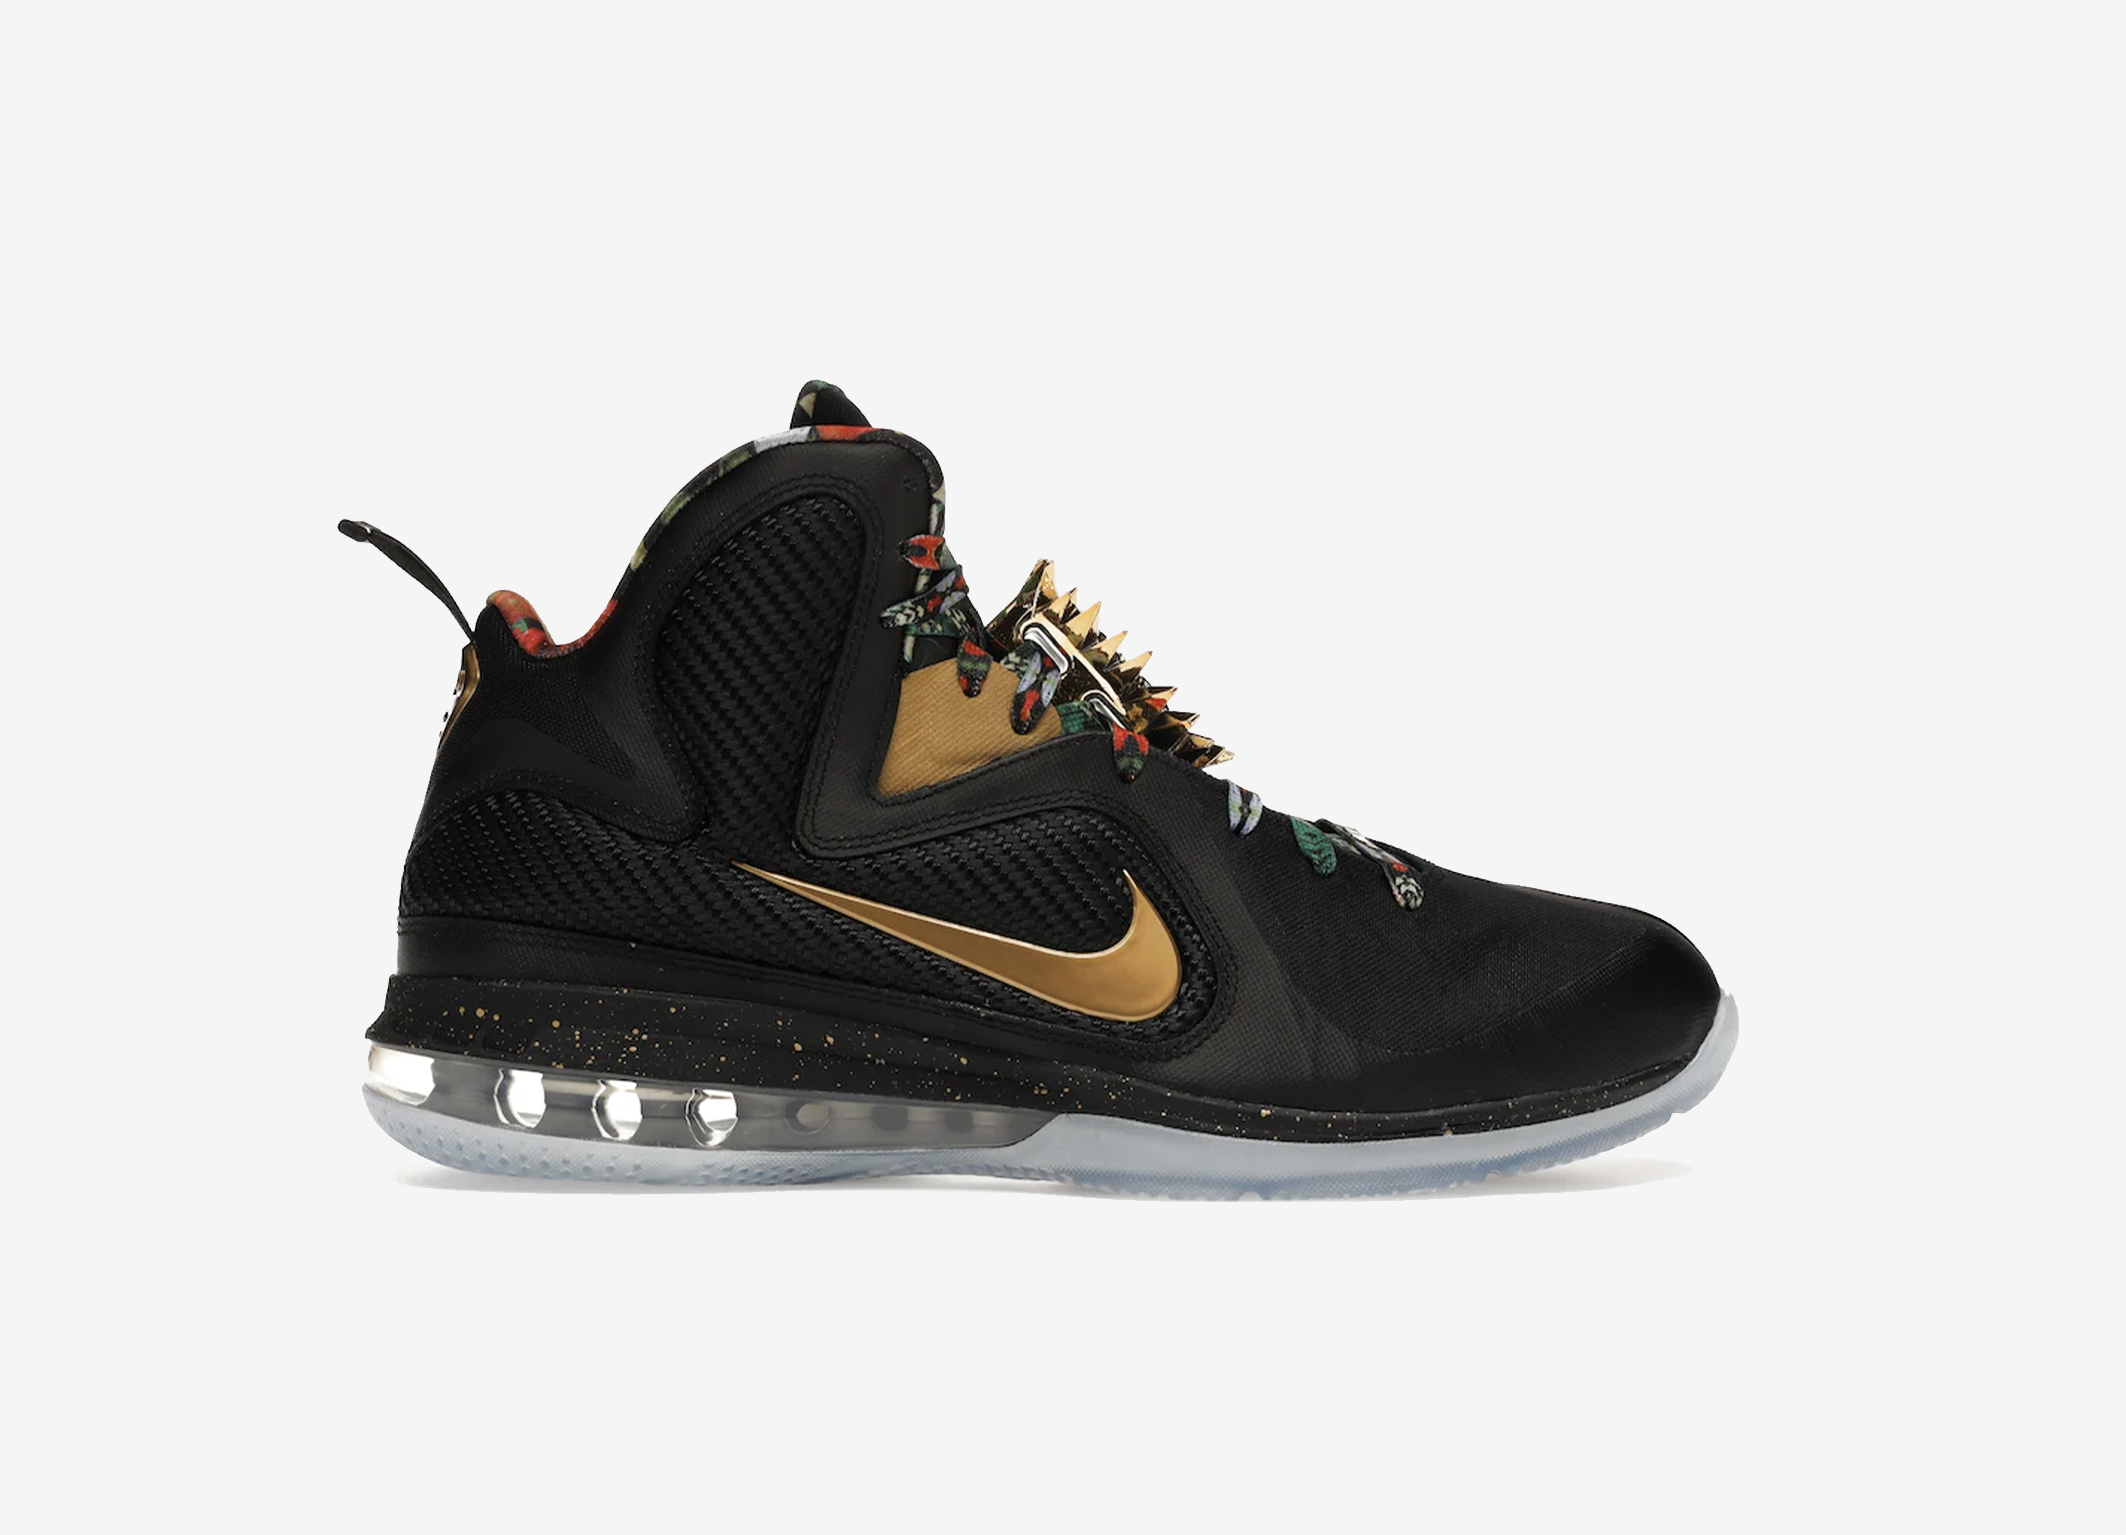 LEBRON 9 Watch the Throne